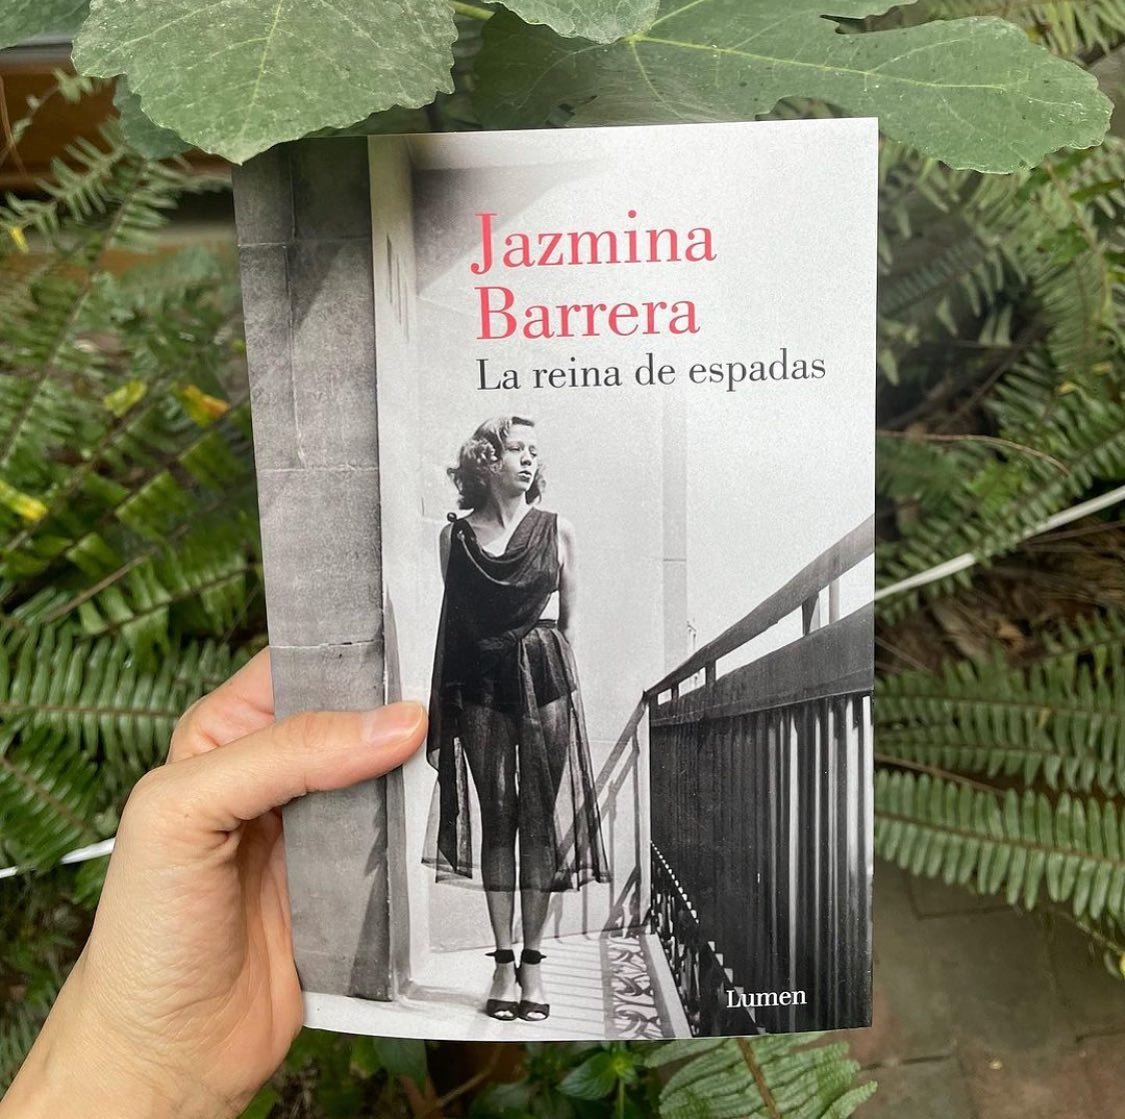 Jazmina Barrera&rsquo;s LA REINA DE ESPADAS&mdash;a reconstruction of the life of Elena Garro, an essential 20th-century writer&mdash;is out now with @penguinlibrosmx! 🎉

This book introduces us to an Elena Garro that perhaps only her closest friend